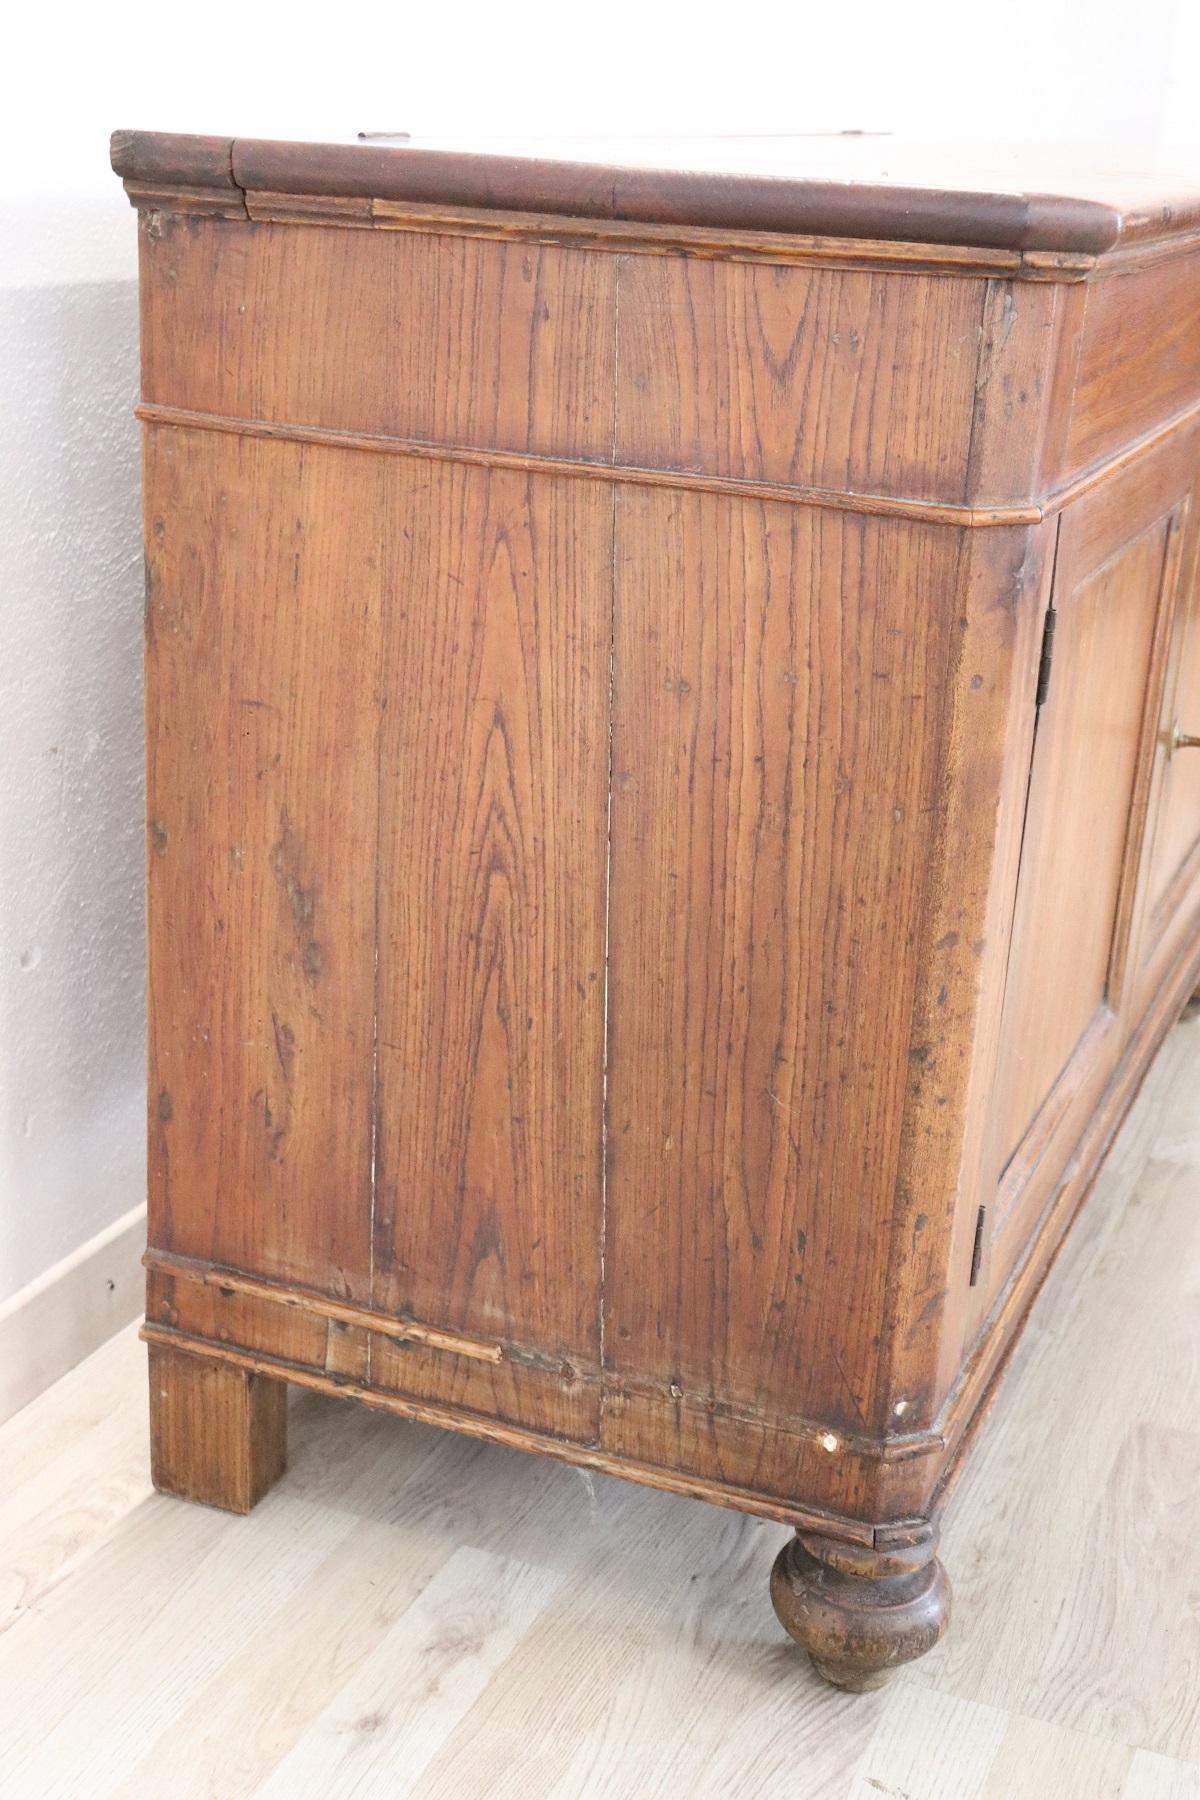 Particular antique sideboard or buffet in solid oakwood. Very simple and linear, suitable for any environment. The peculiarity of this sideboard is the compartment under the top. This room was used in the nineteenth century by Italian women who,